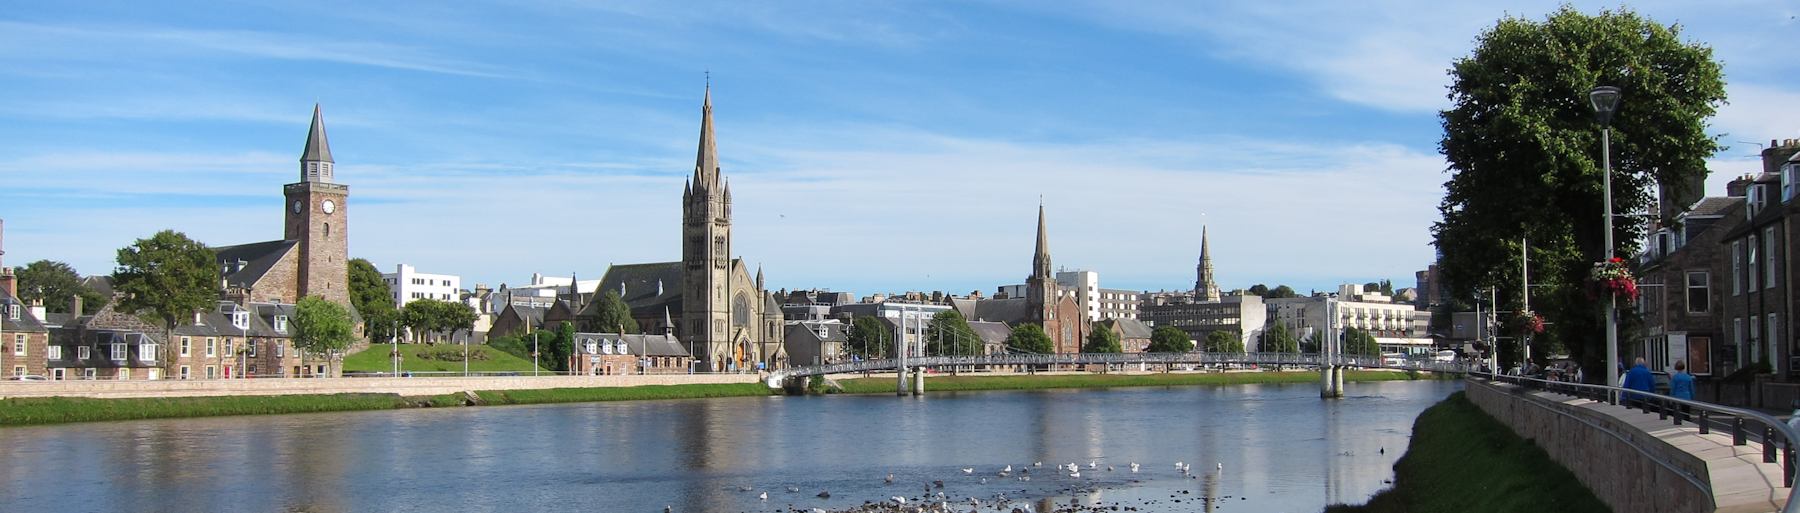 Inverness and the River Ness